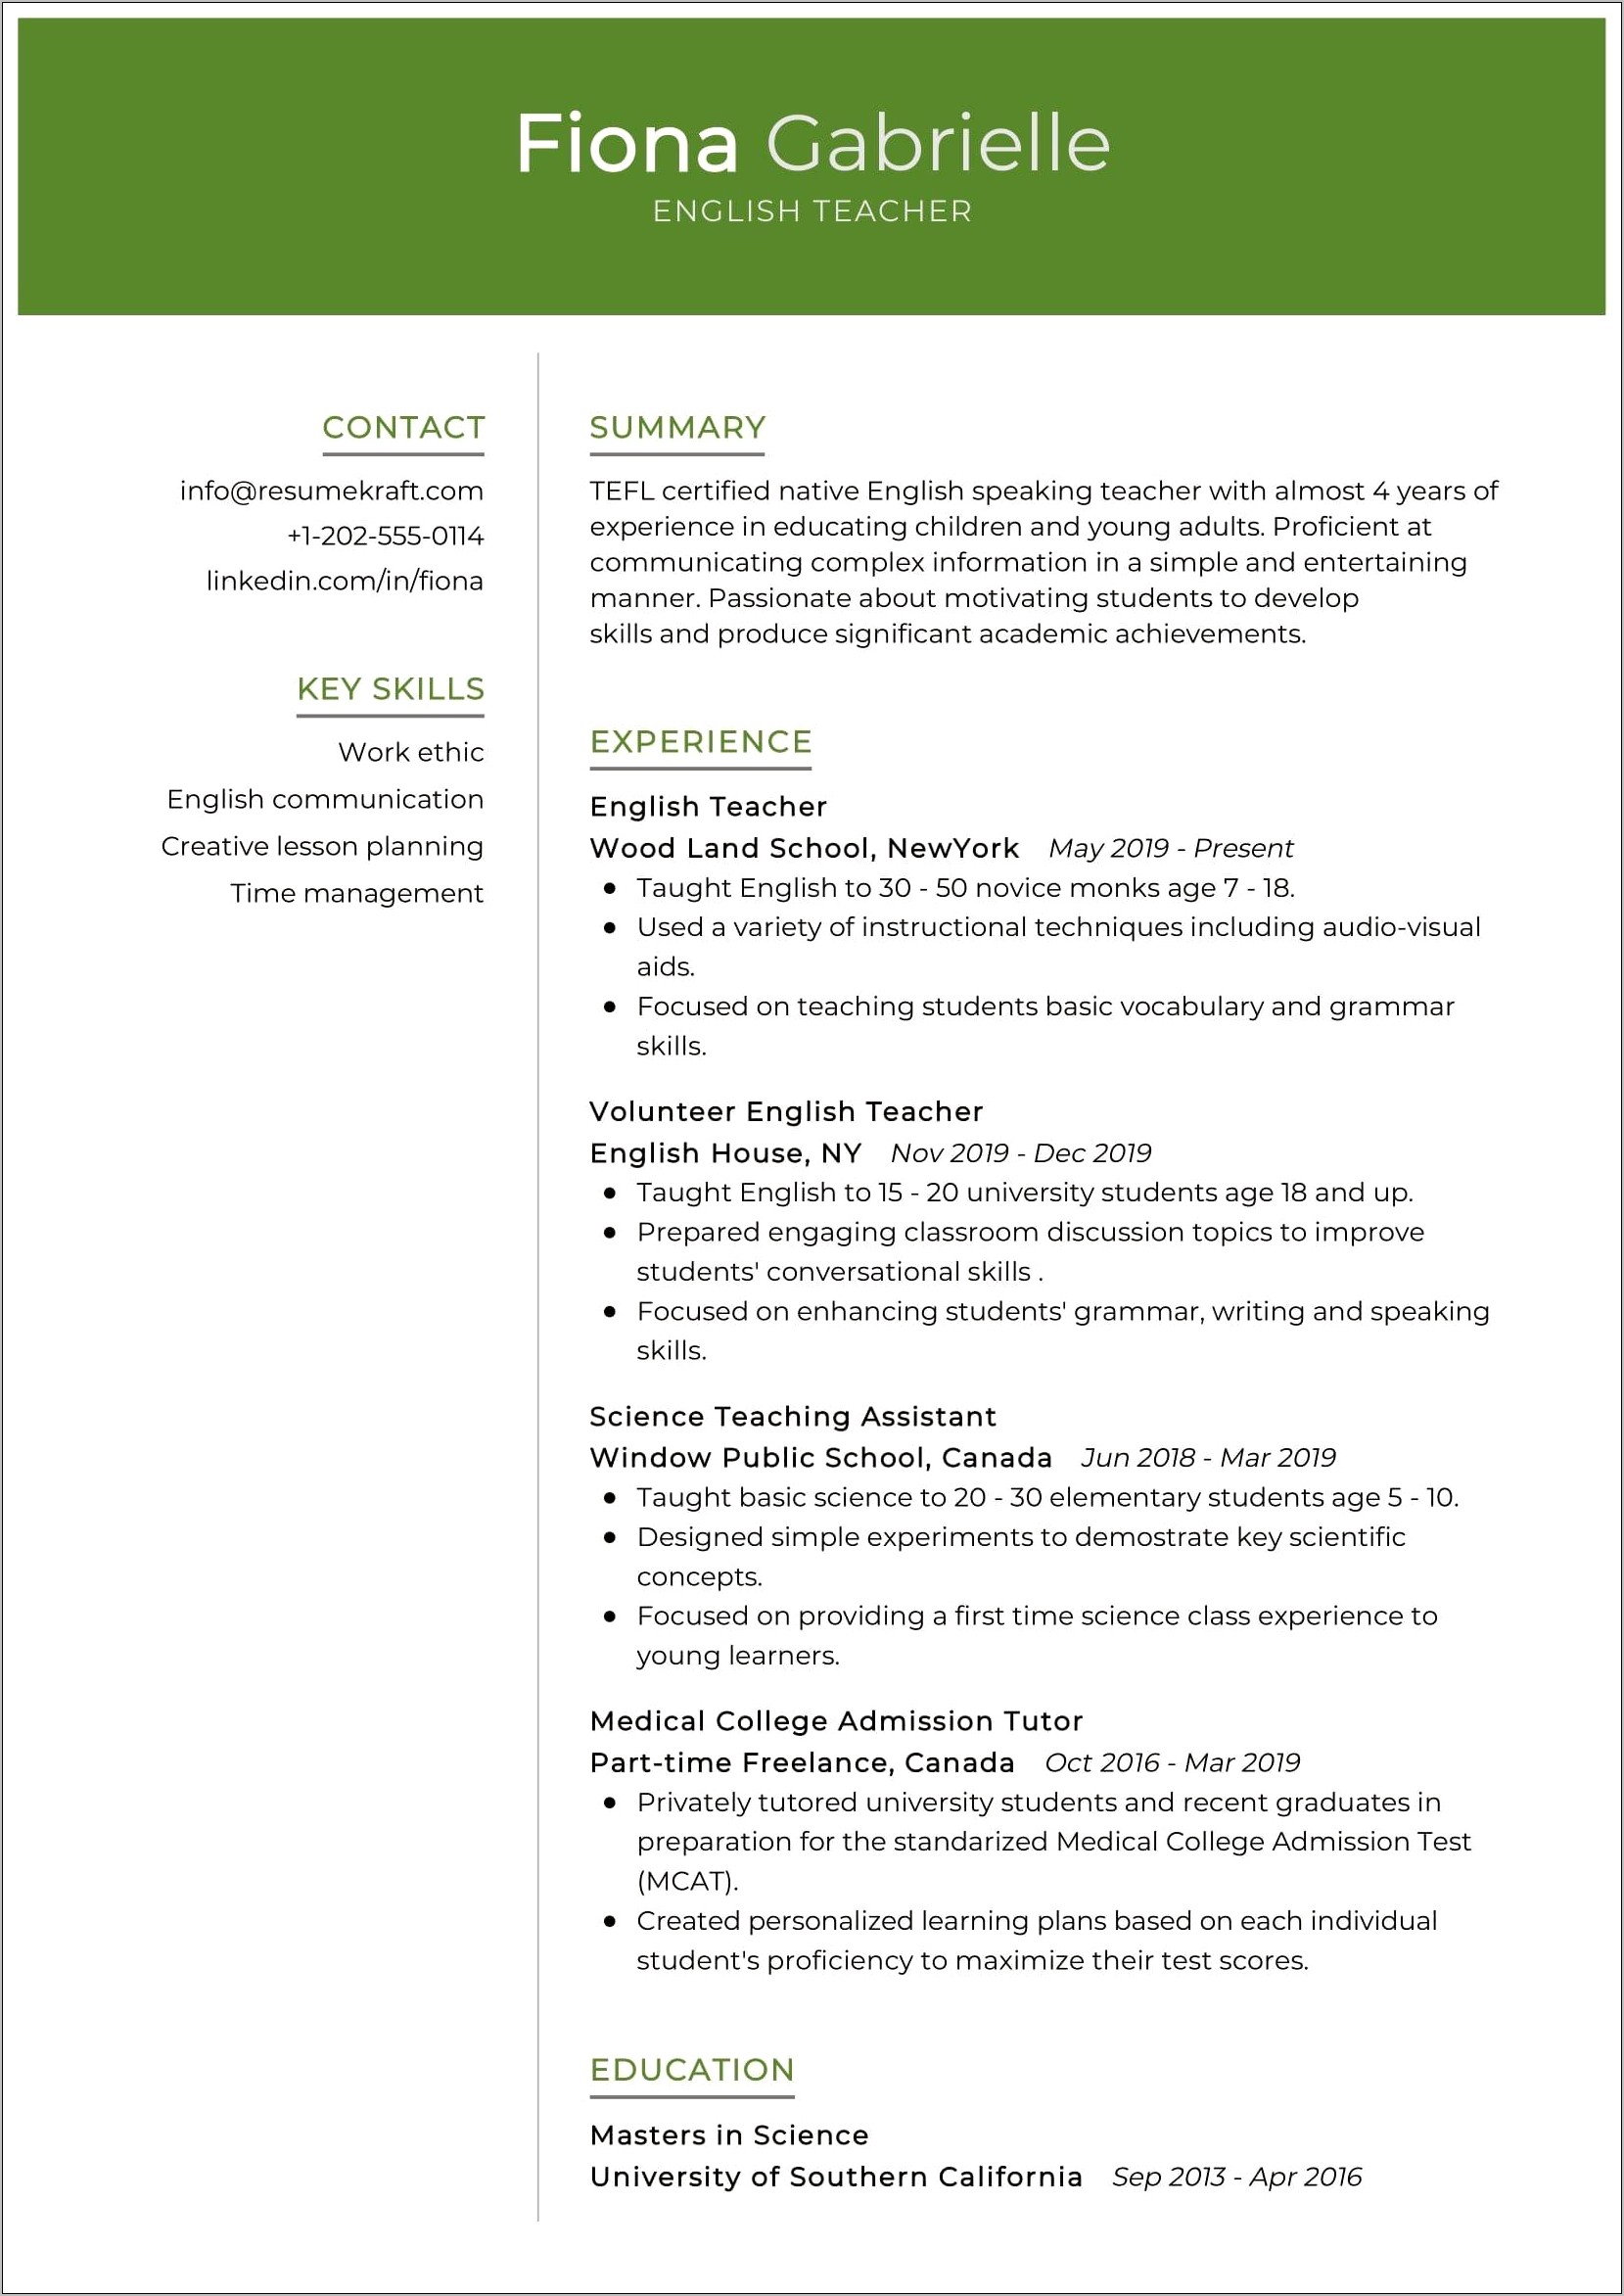 Description Of Work Experience Of Tutor For Resume